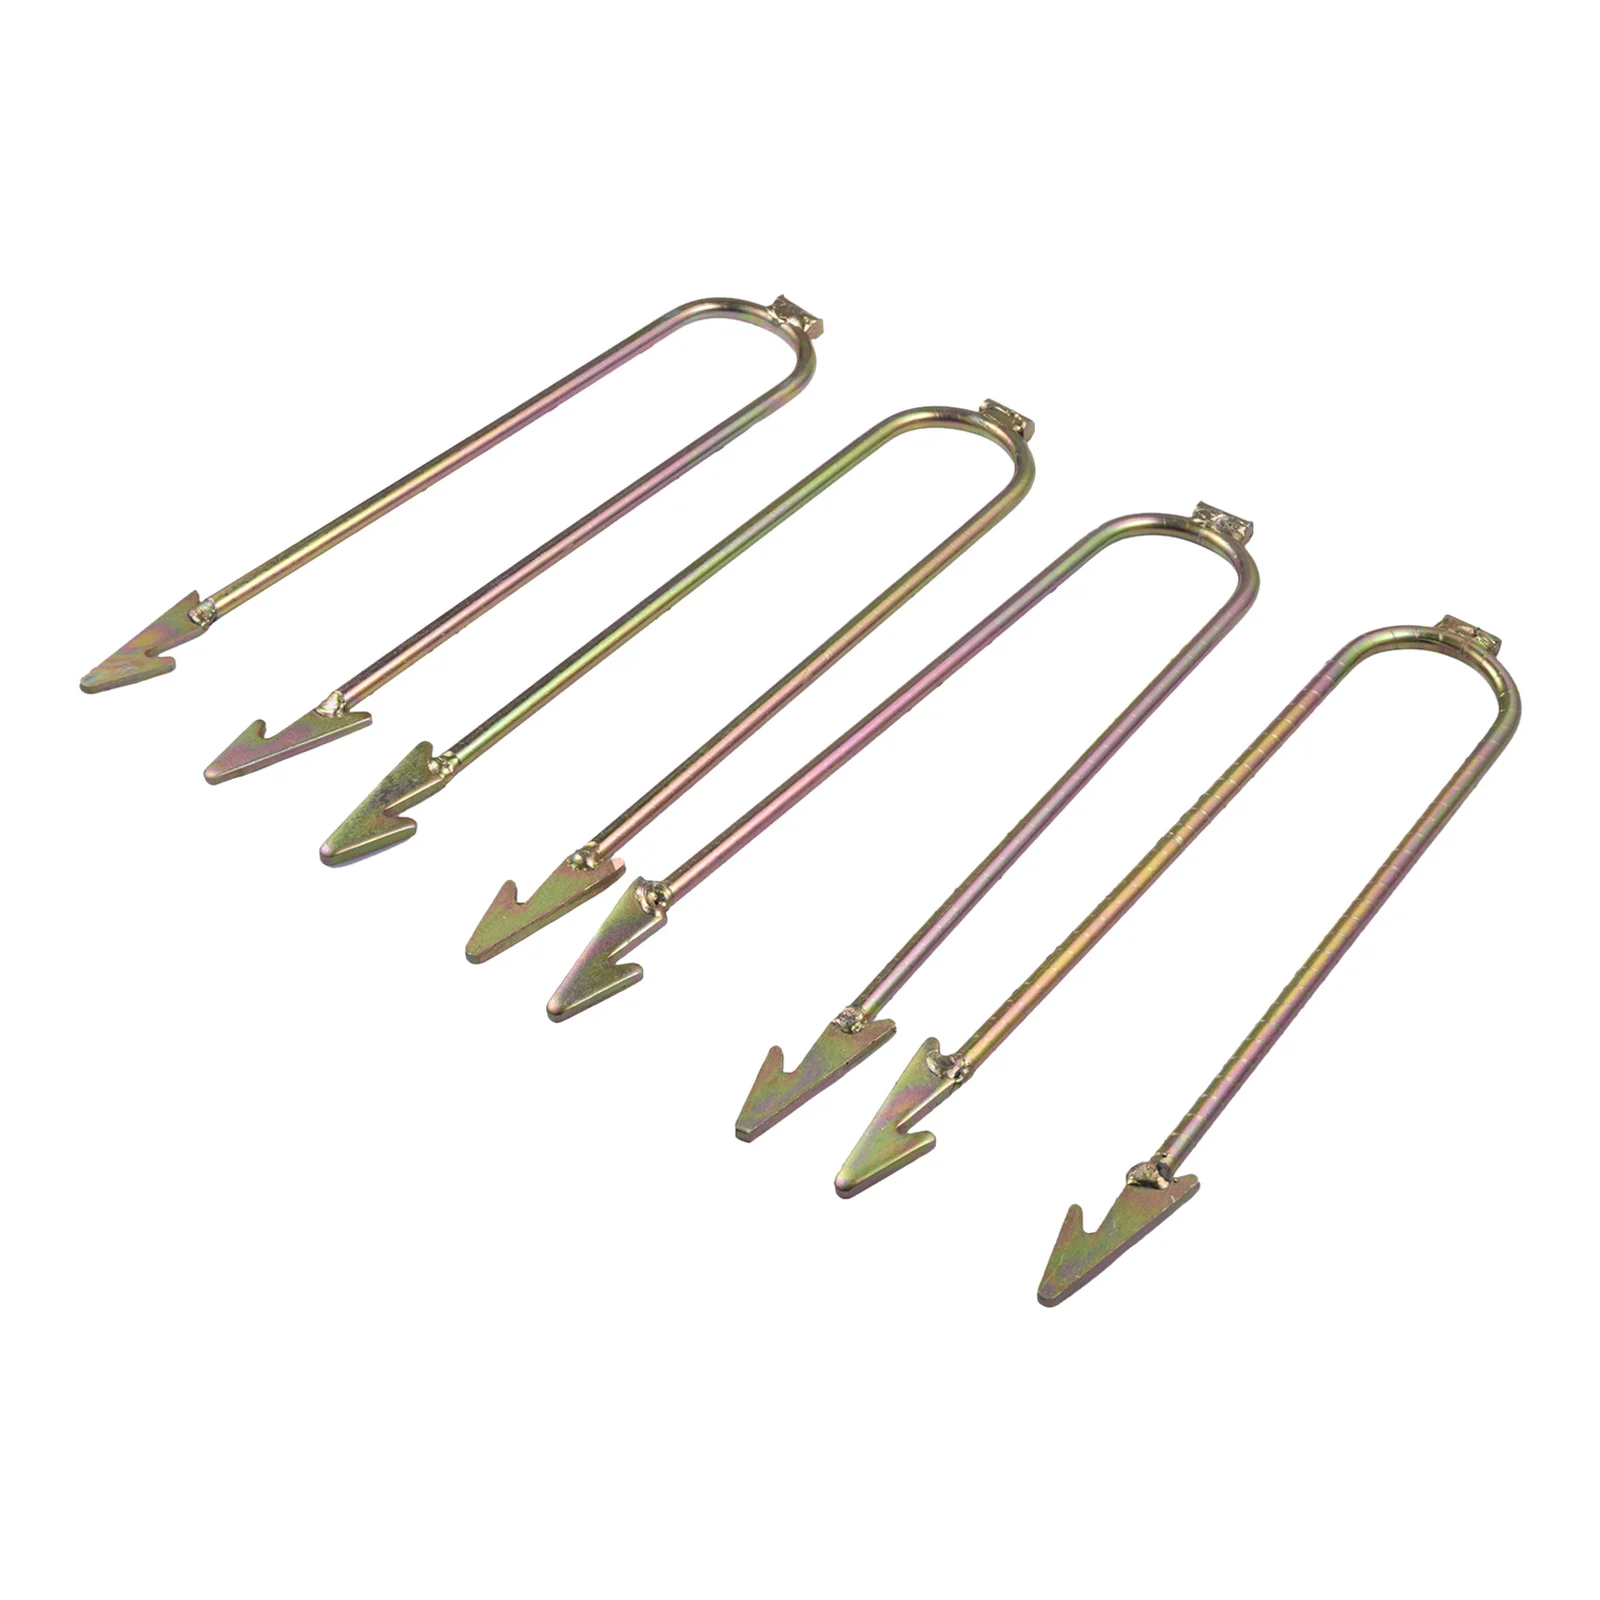 Set of 4 Metal Wind Stakes Ground Anchors fits for Trampolines Fences, Easy To Install